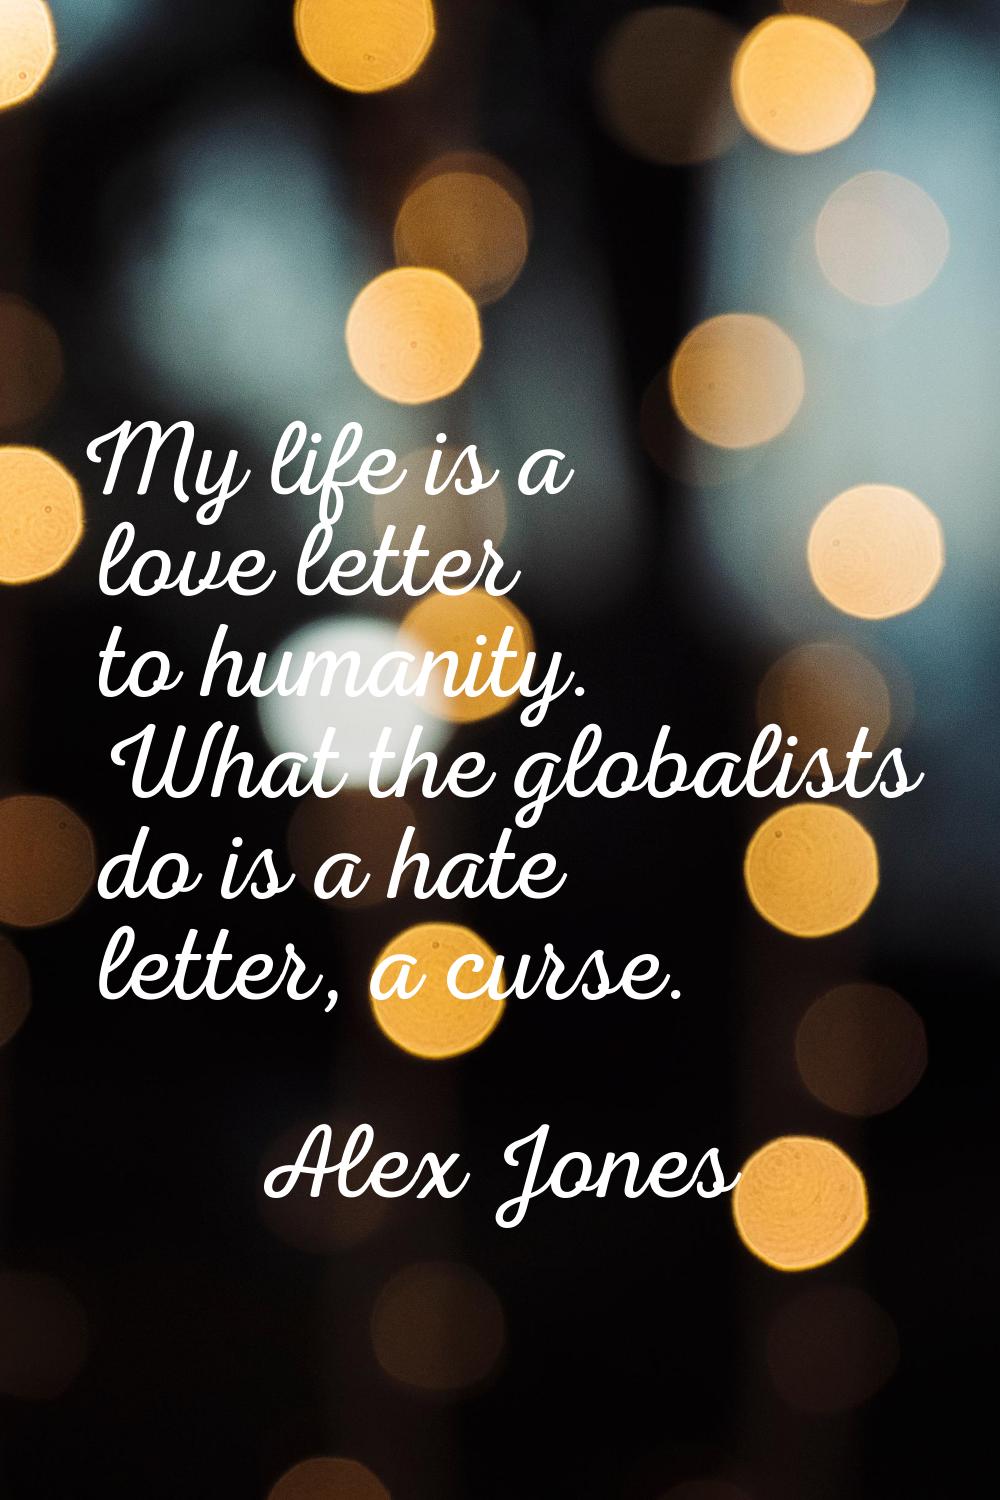 My life is a love letter to humanity. What the globalists do is a hate letter, a curse.